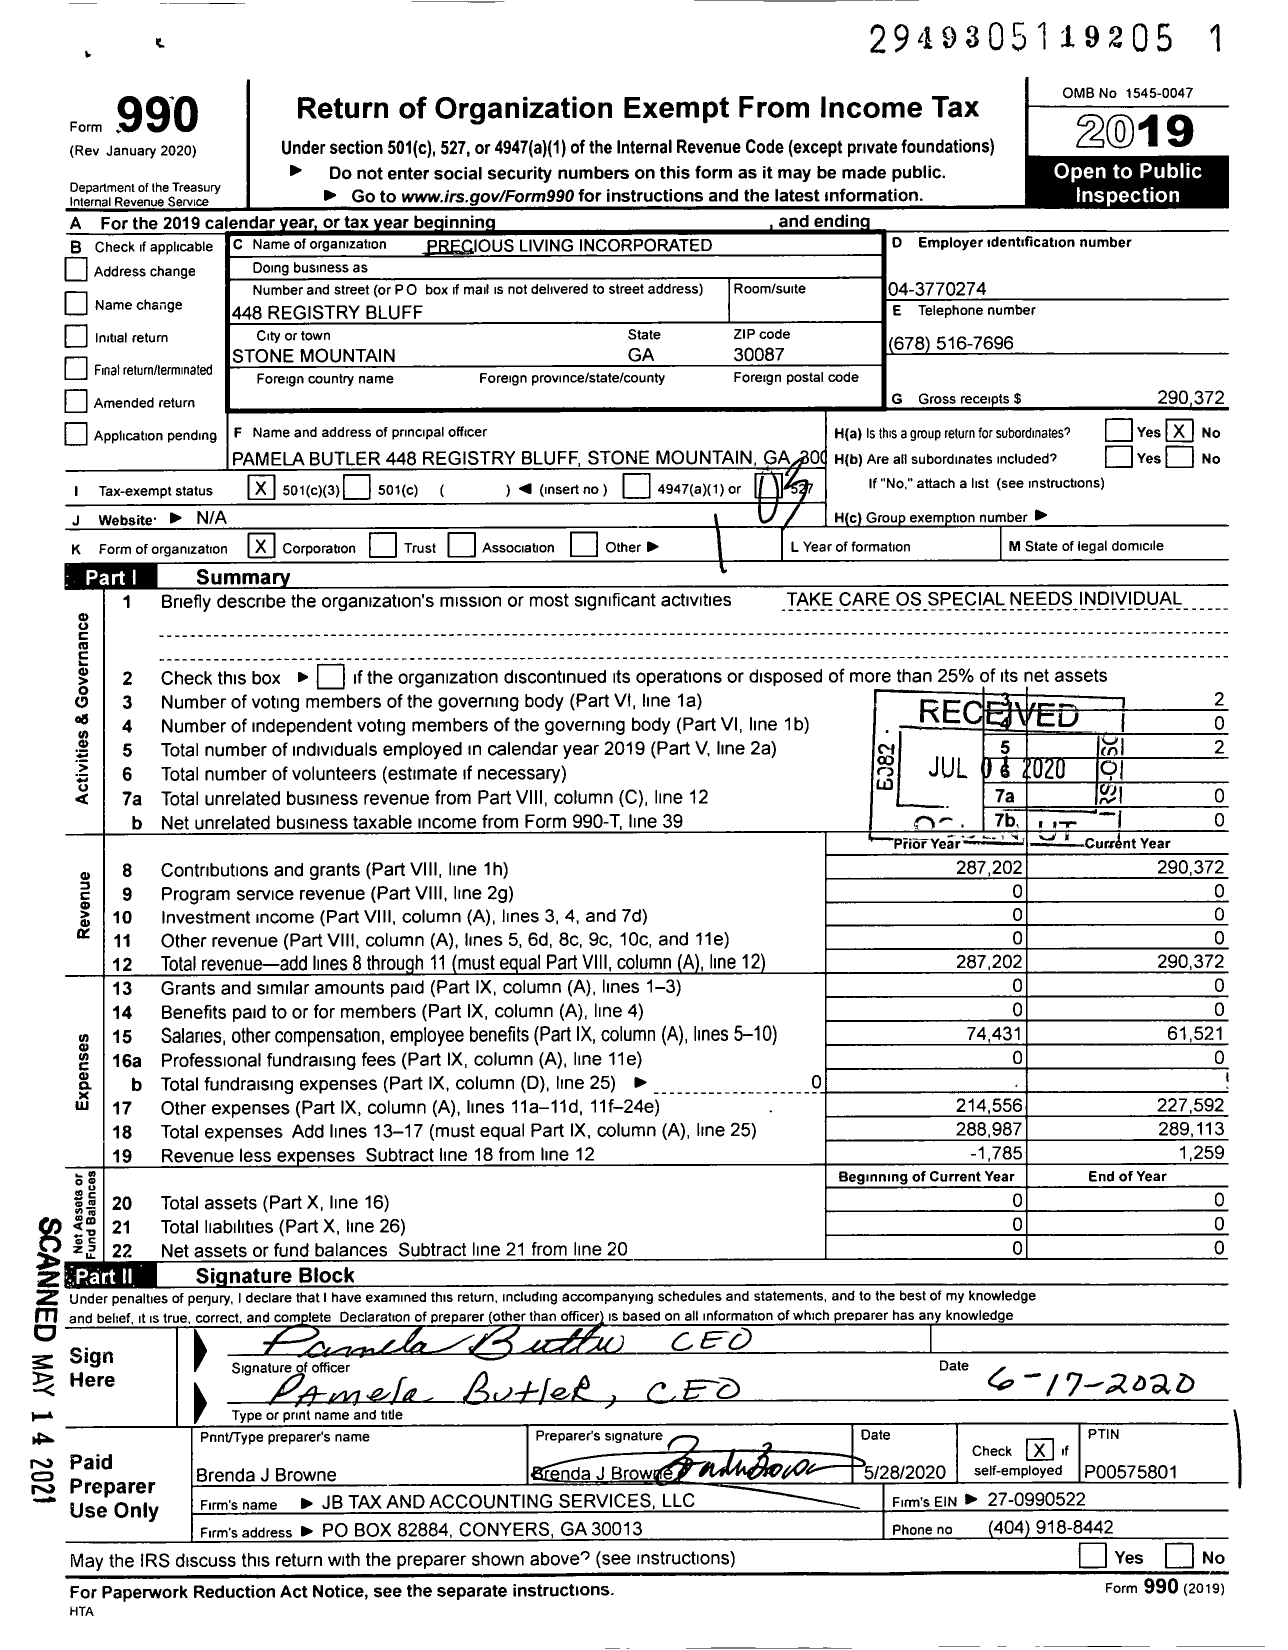 Image of first page of 2019 Form 990 for Precious Living Incorporated